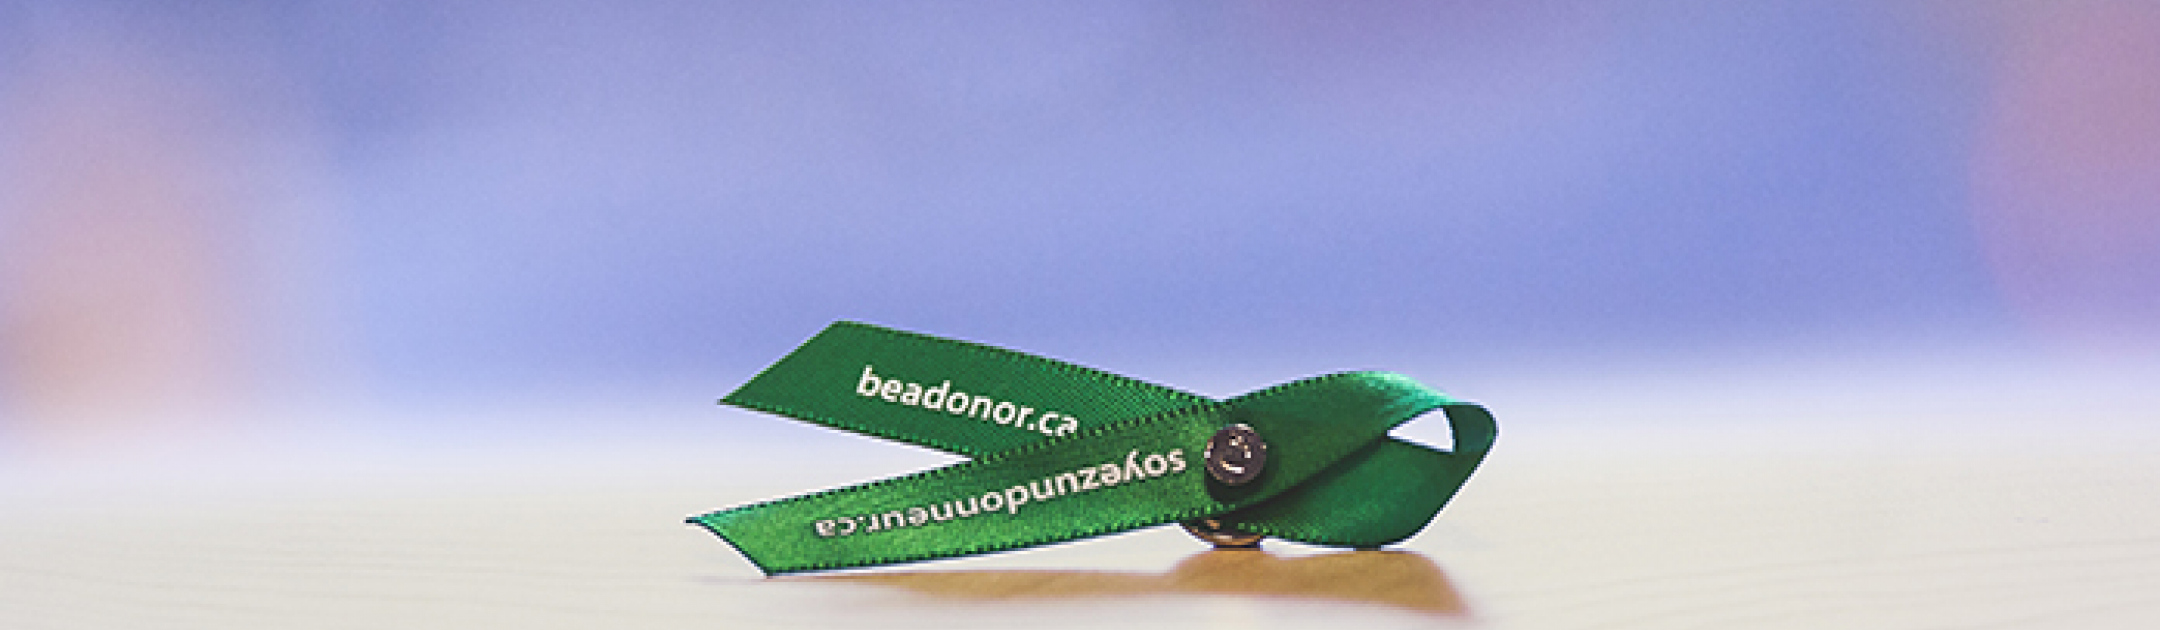 Be a donor ribbon